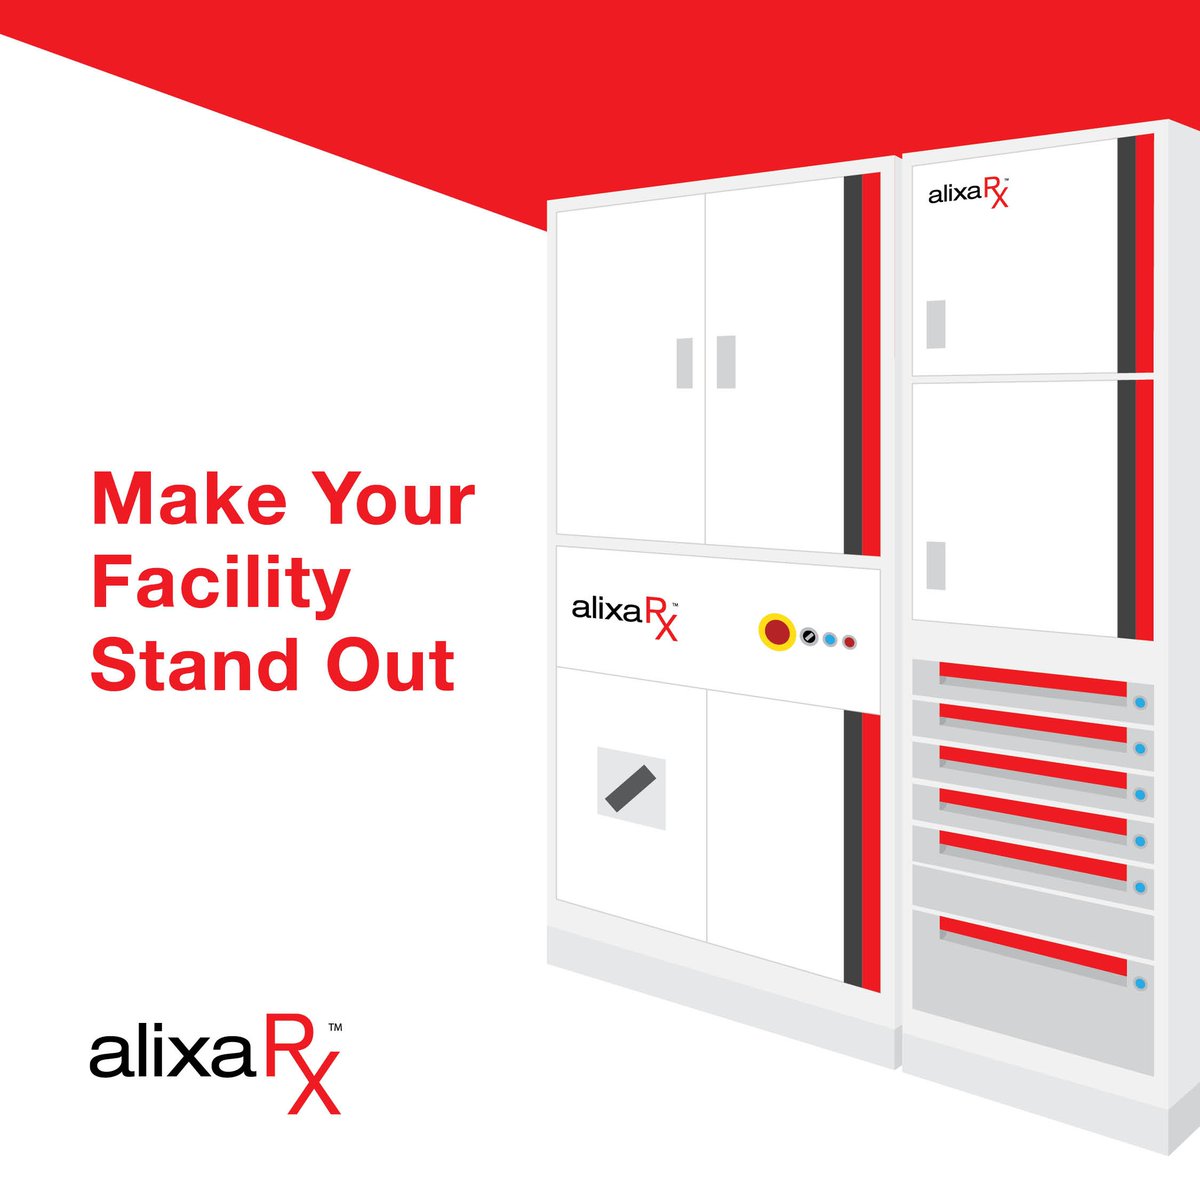 Make Your Facility Stand Out

AlixaRx offers unique pharmacy solutions that will increase safety, reduce waste and create more time for direct care to residents.

Find out more at AlixaRx.com

#AlixaRx #PatientCentered #PharmacyServices